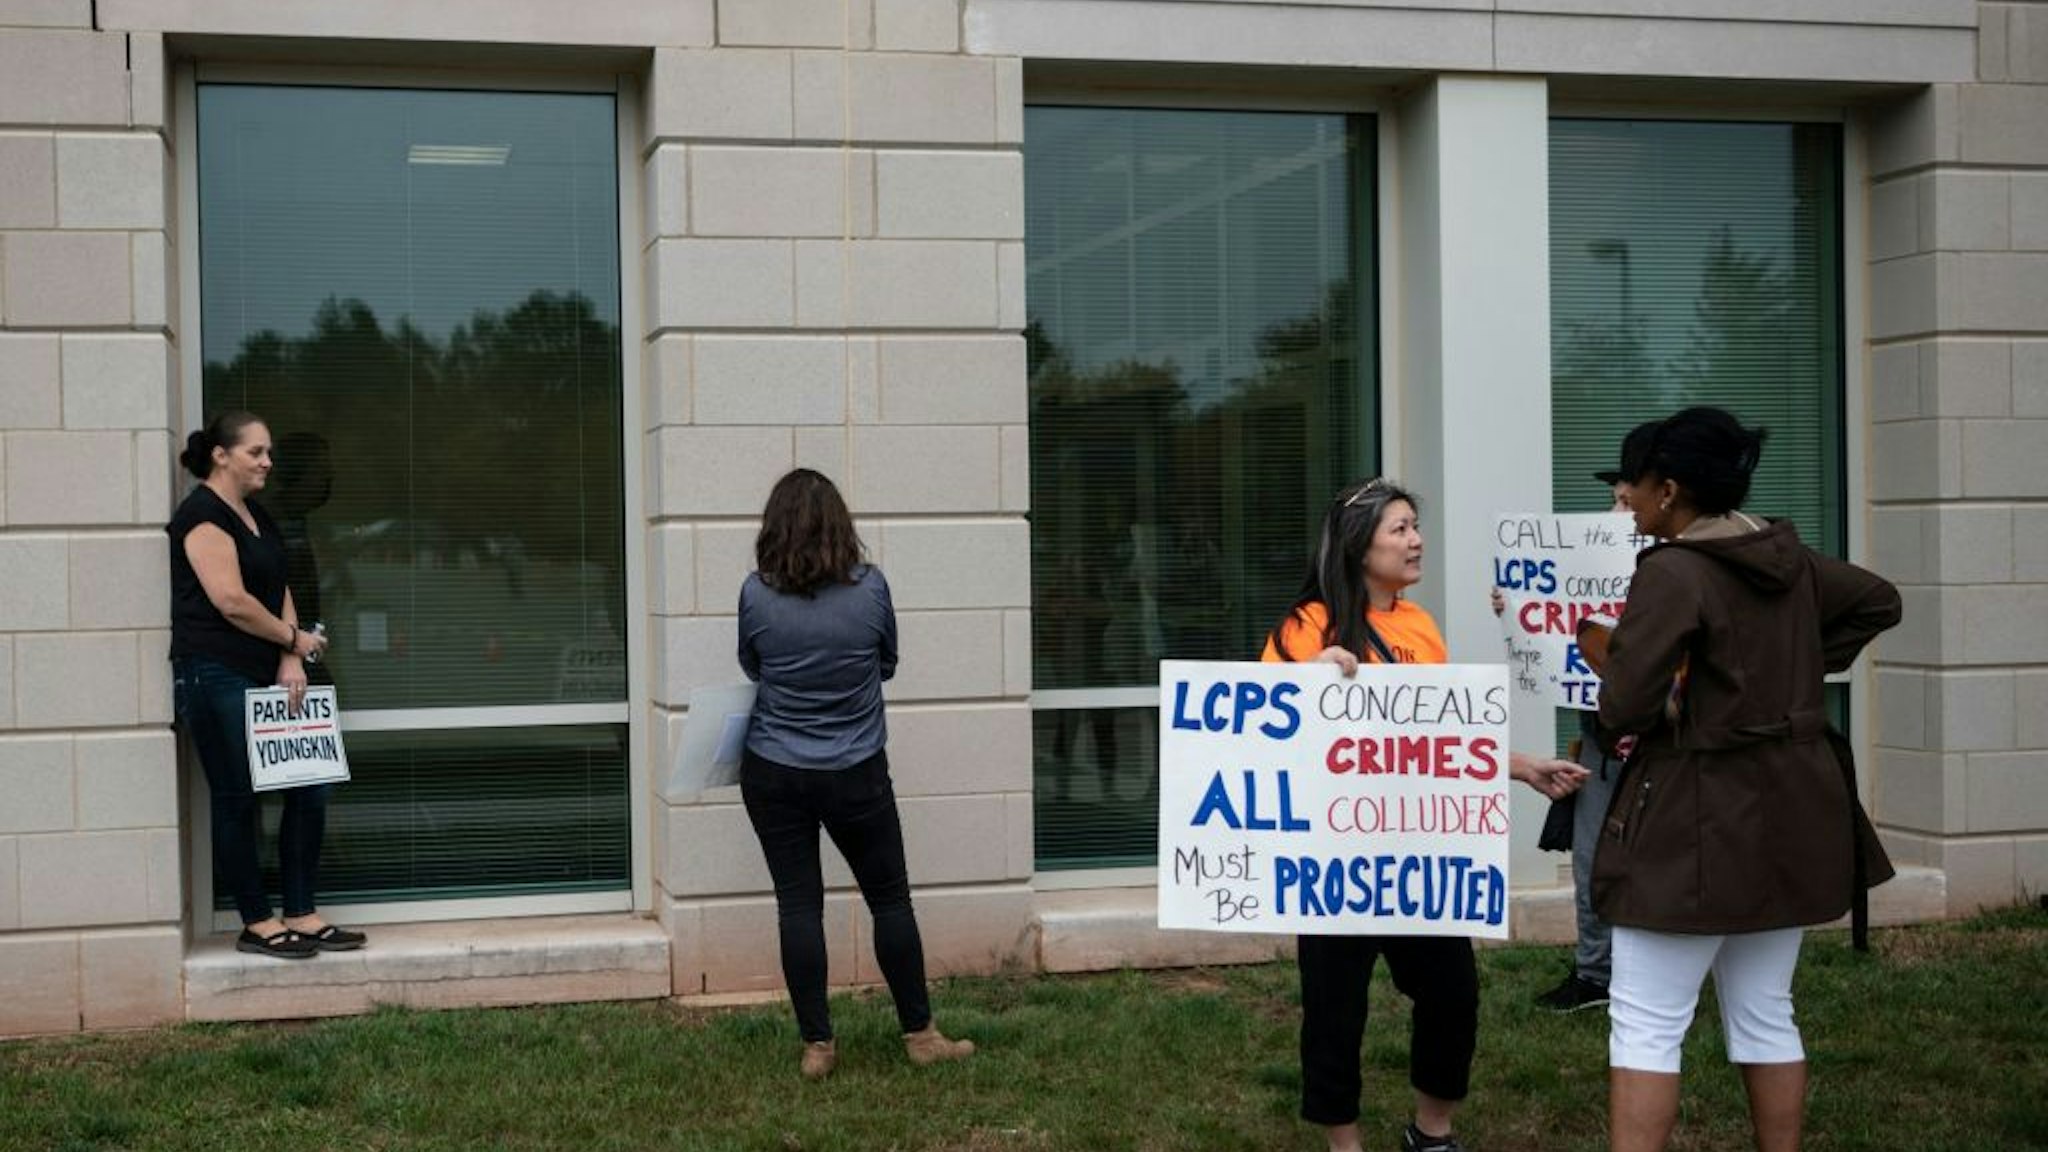 Protesters and activists hold signs as they stand outside a Loudoun County Public Schools (LCPS) board meeting in Ashburn, Virginia on October 12, 2021.